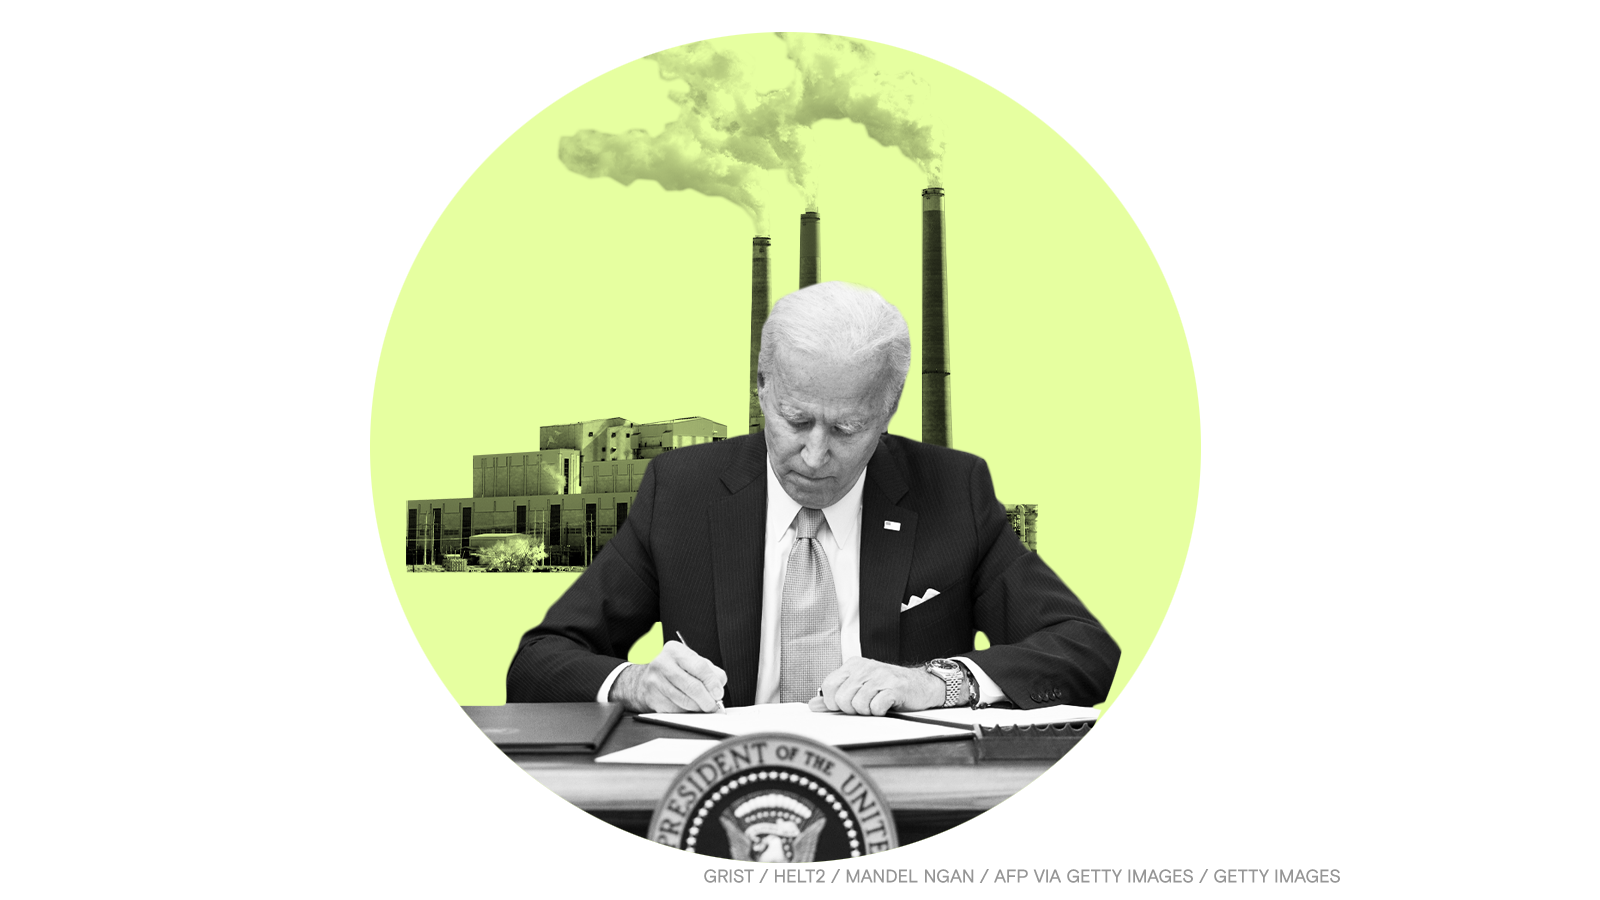 Biden signing a bill against a background of smokestacks.